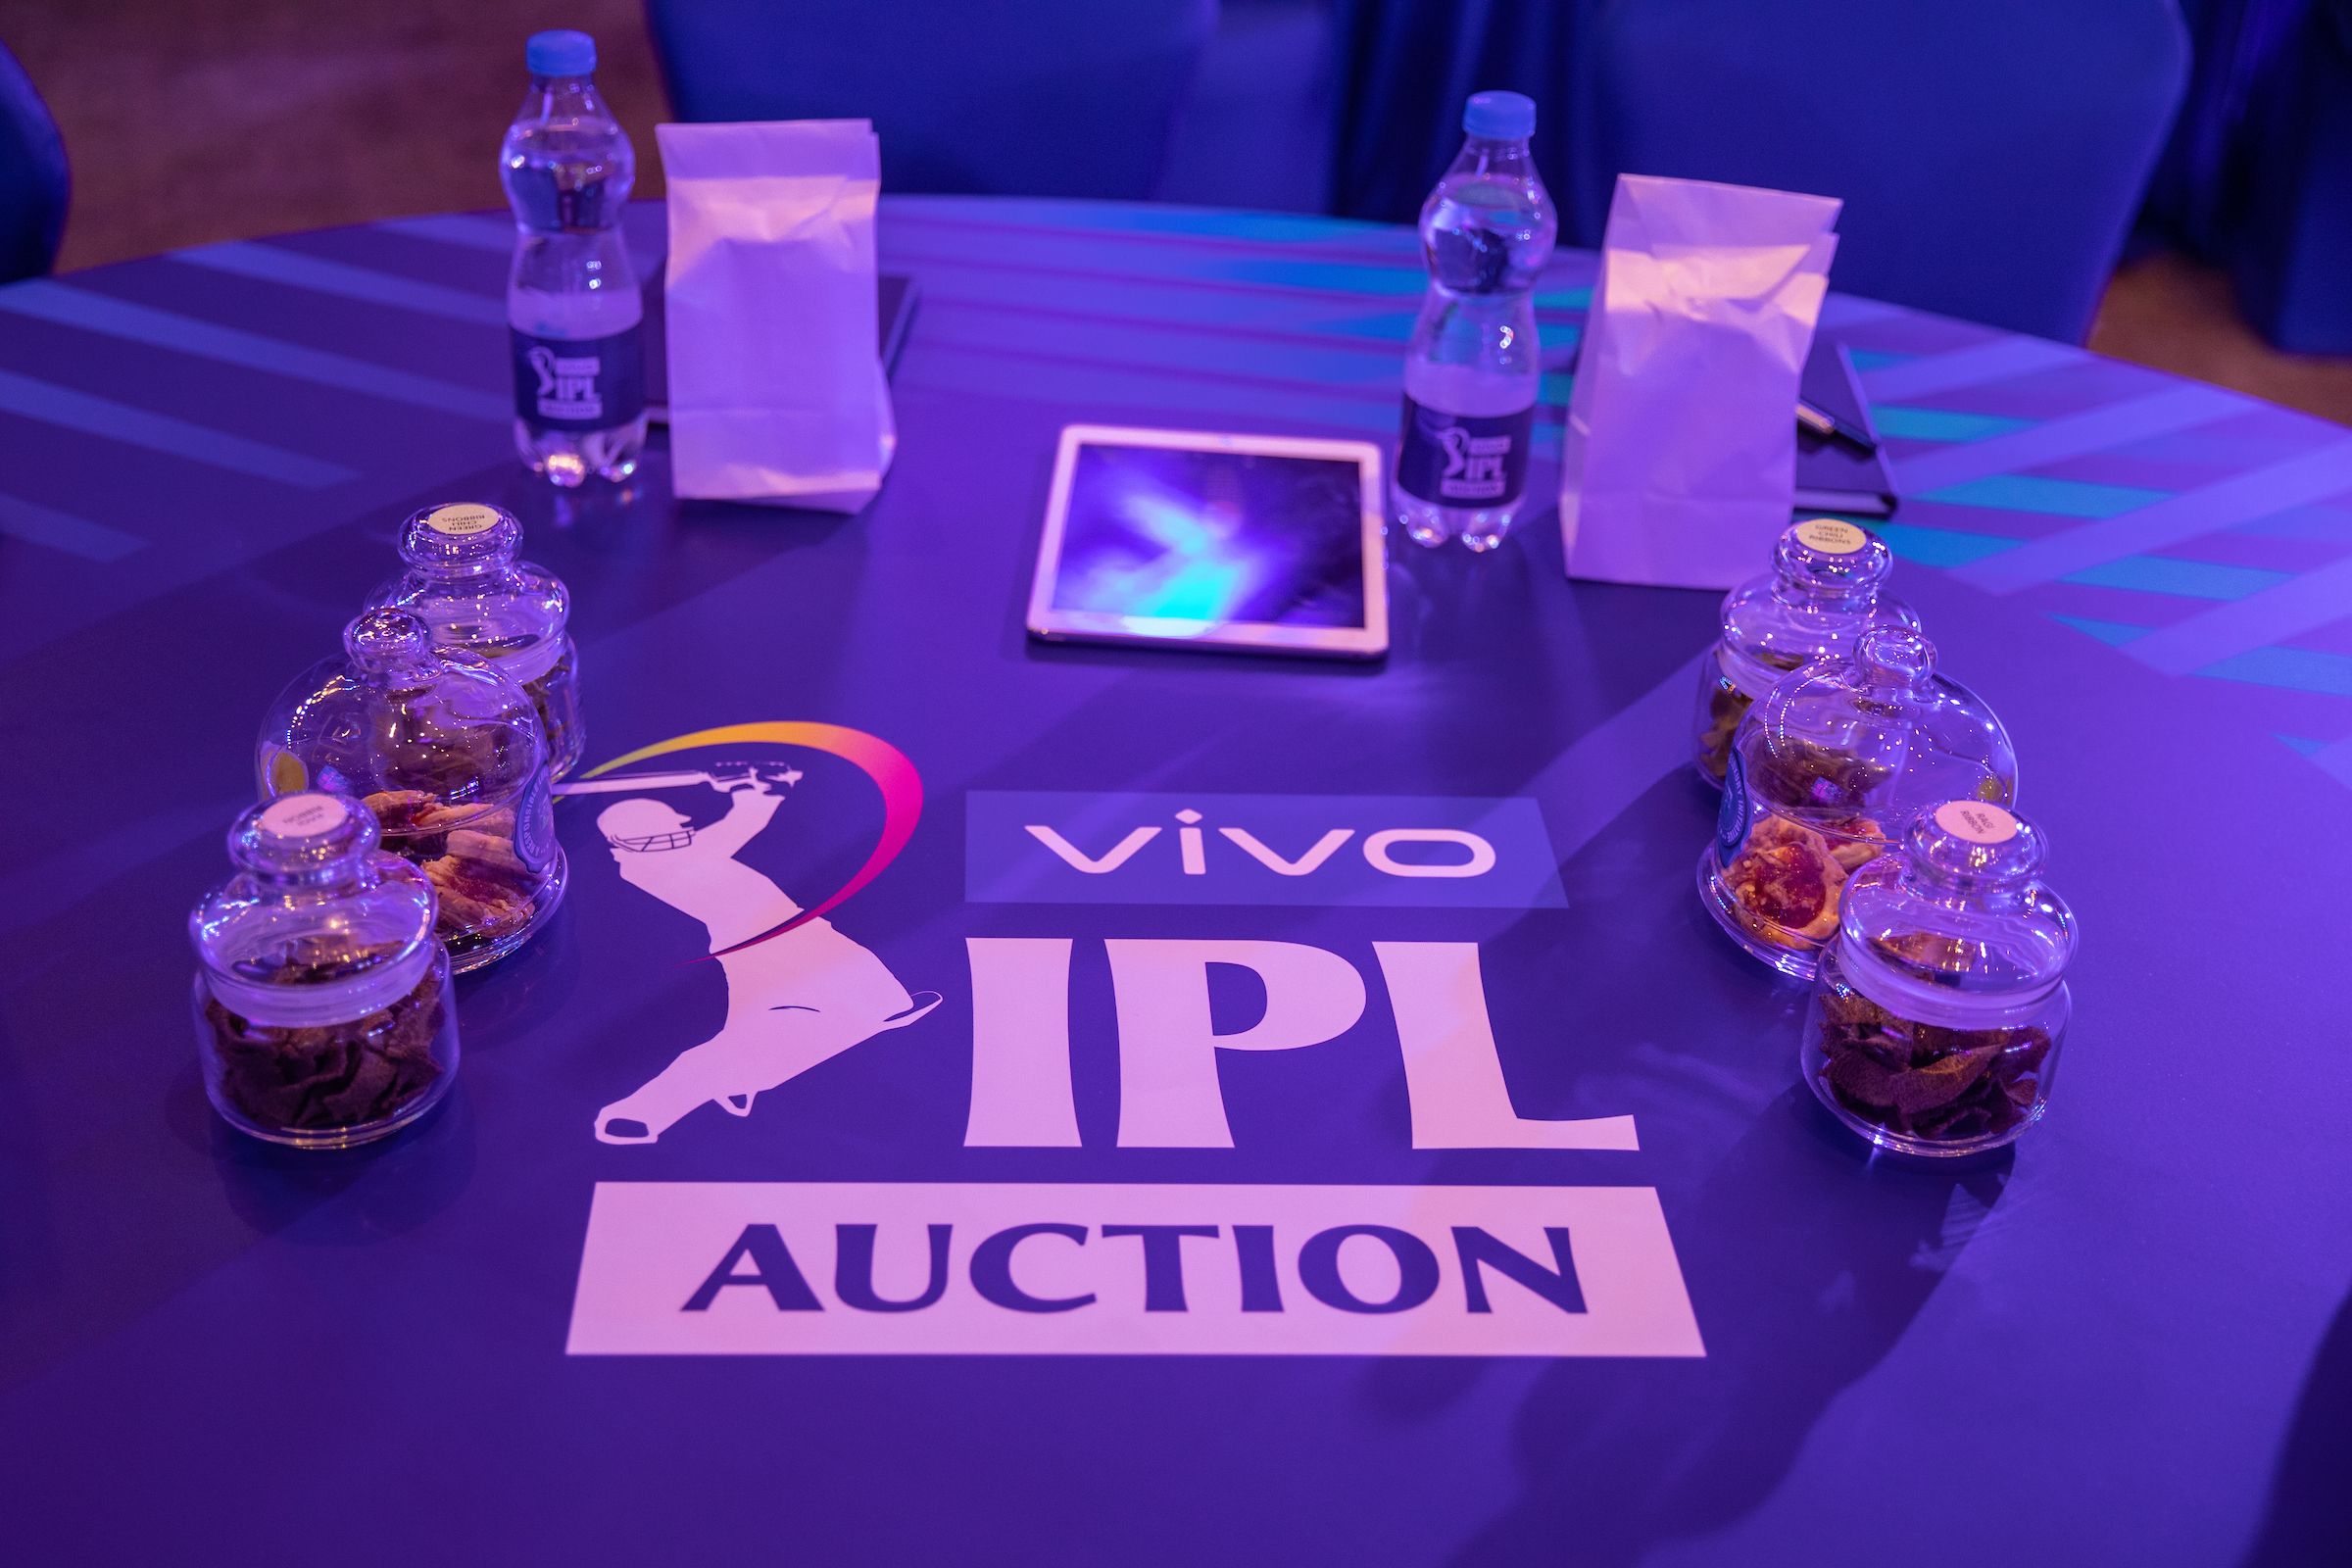 Legends and pundits react to IPL 2021 auction throwing wild surprises